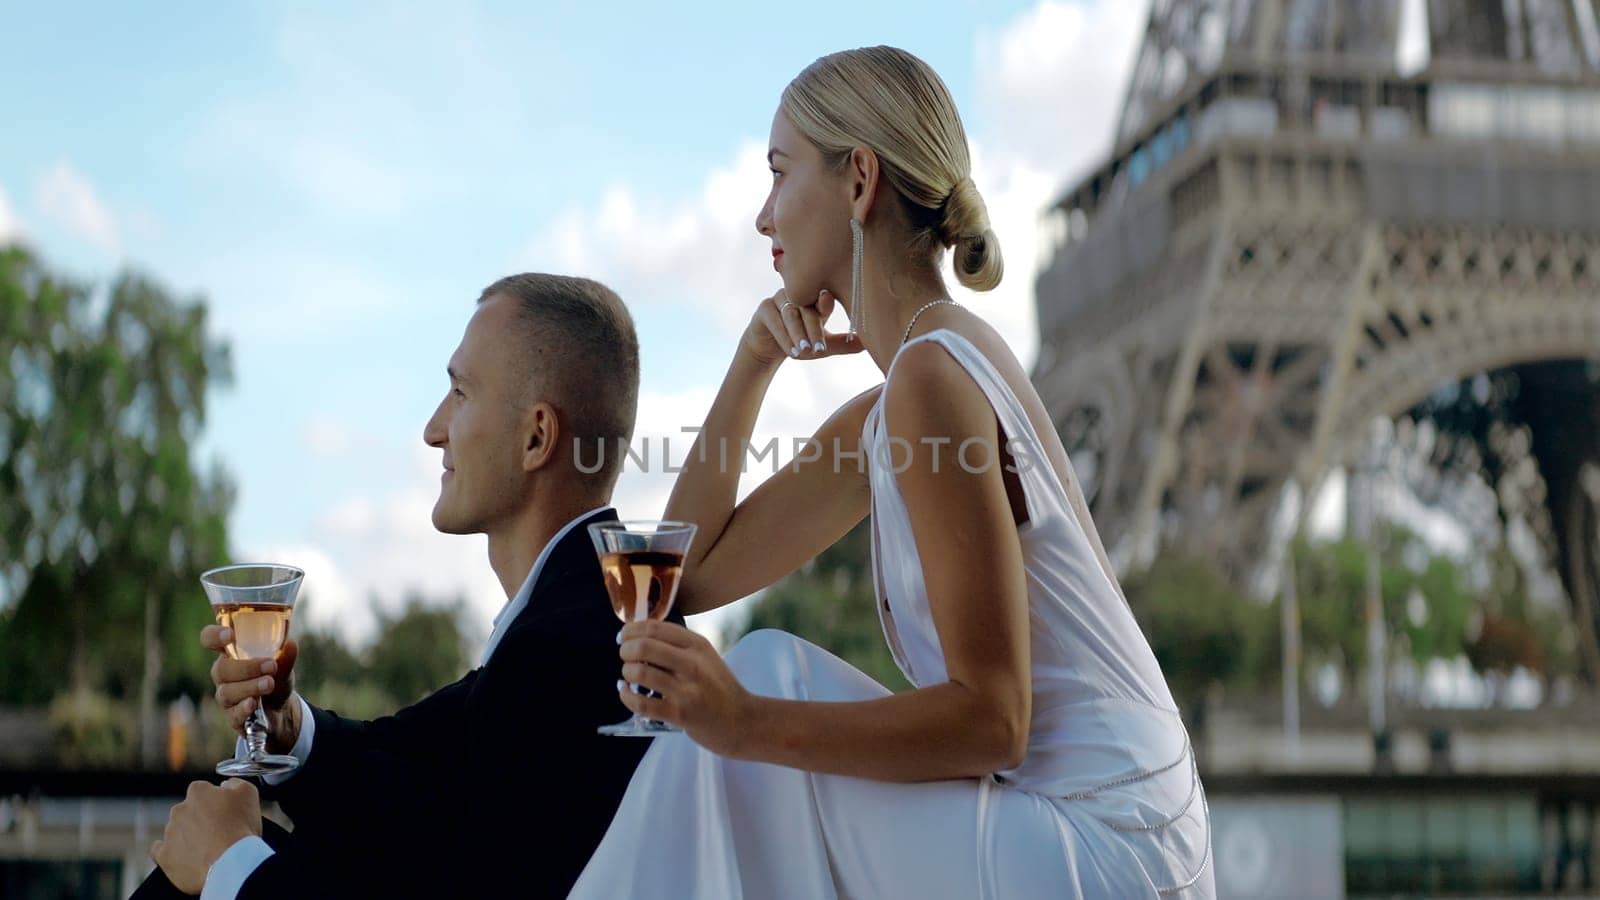 Chatting young couple on vacation. Action. A beautiful elegant girl in a white dress sits with her man and communicates against the background of sights in the summer. High quality 4k footage